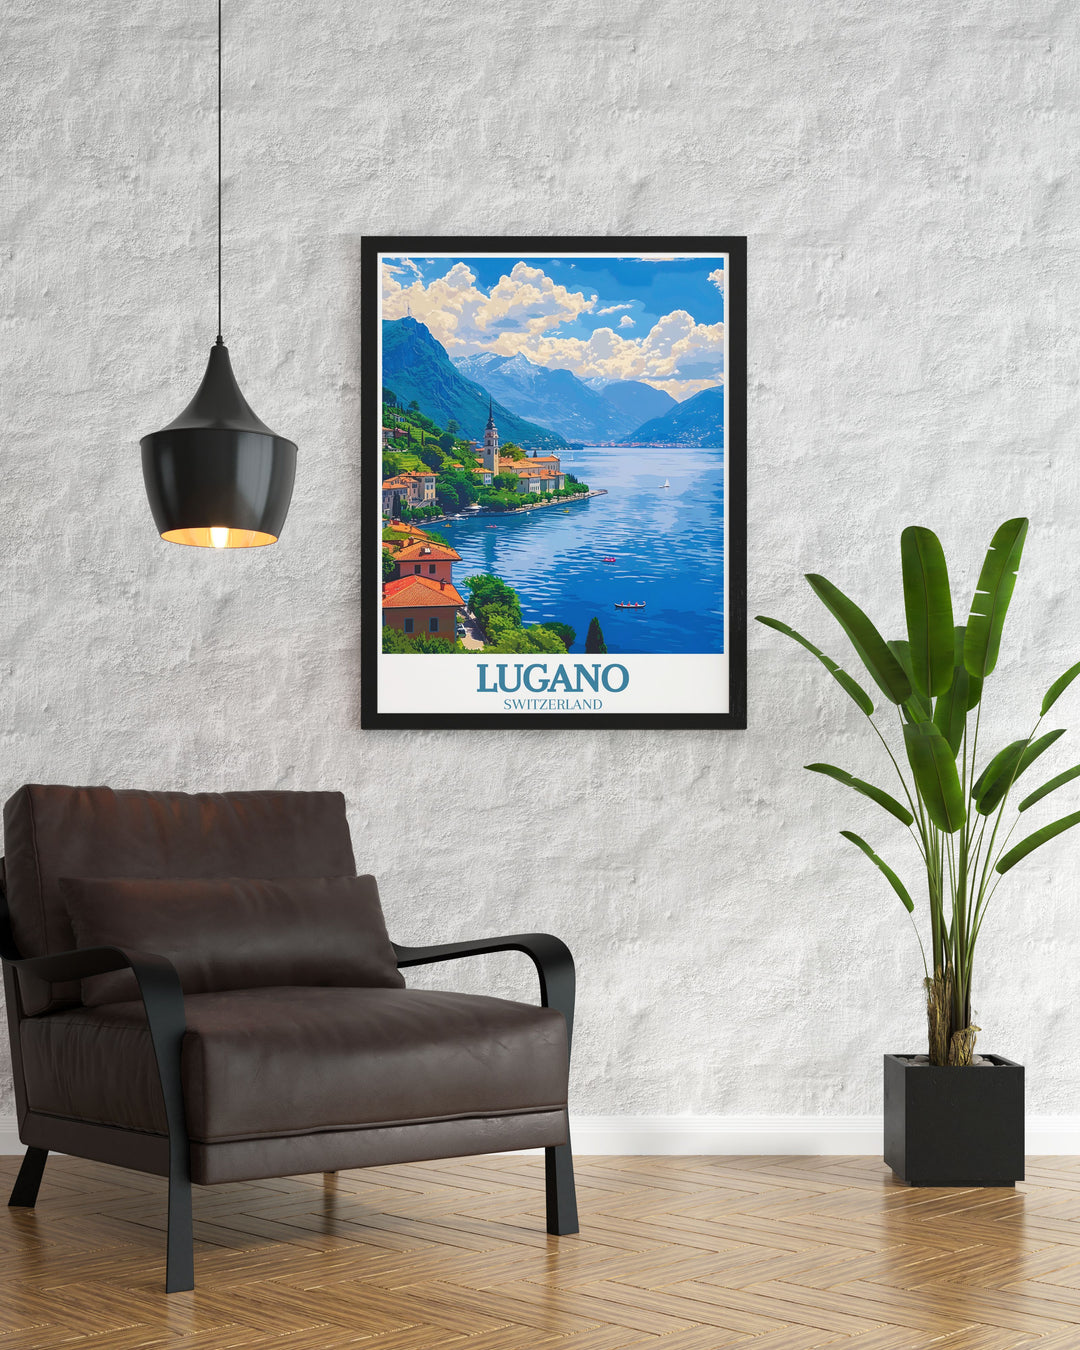 The picturesque Monte Brè, known for its dramatic peaks and stunning vistas, is highlighted in this travel poster. Perfect for those who appreciate natural wonders and majestic mountains.